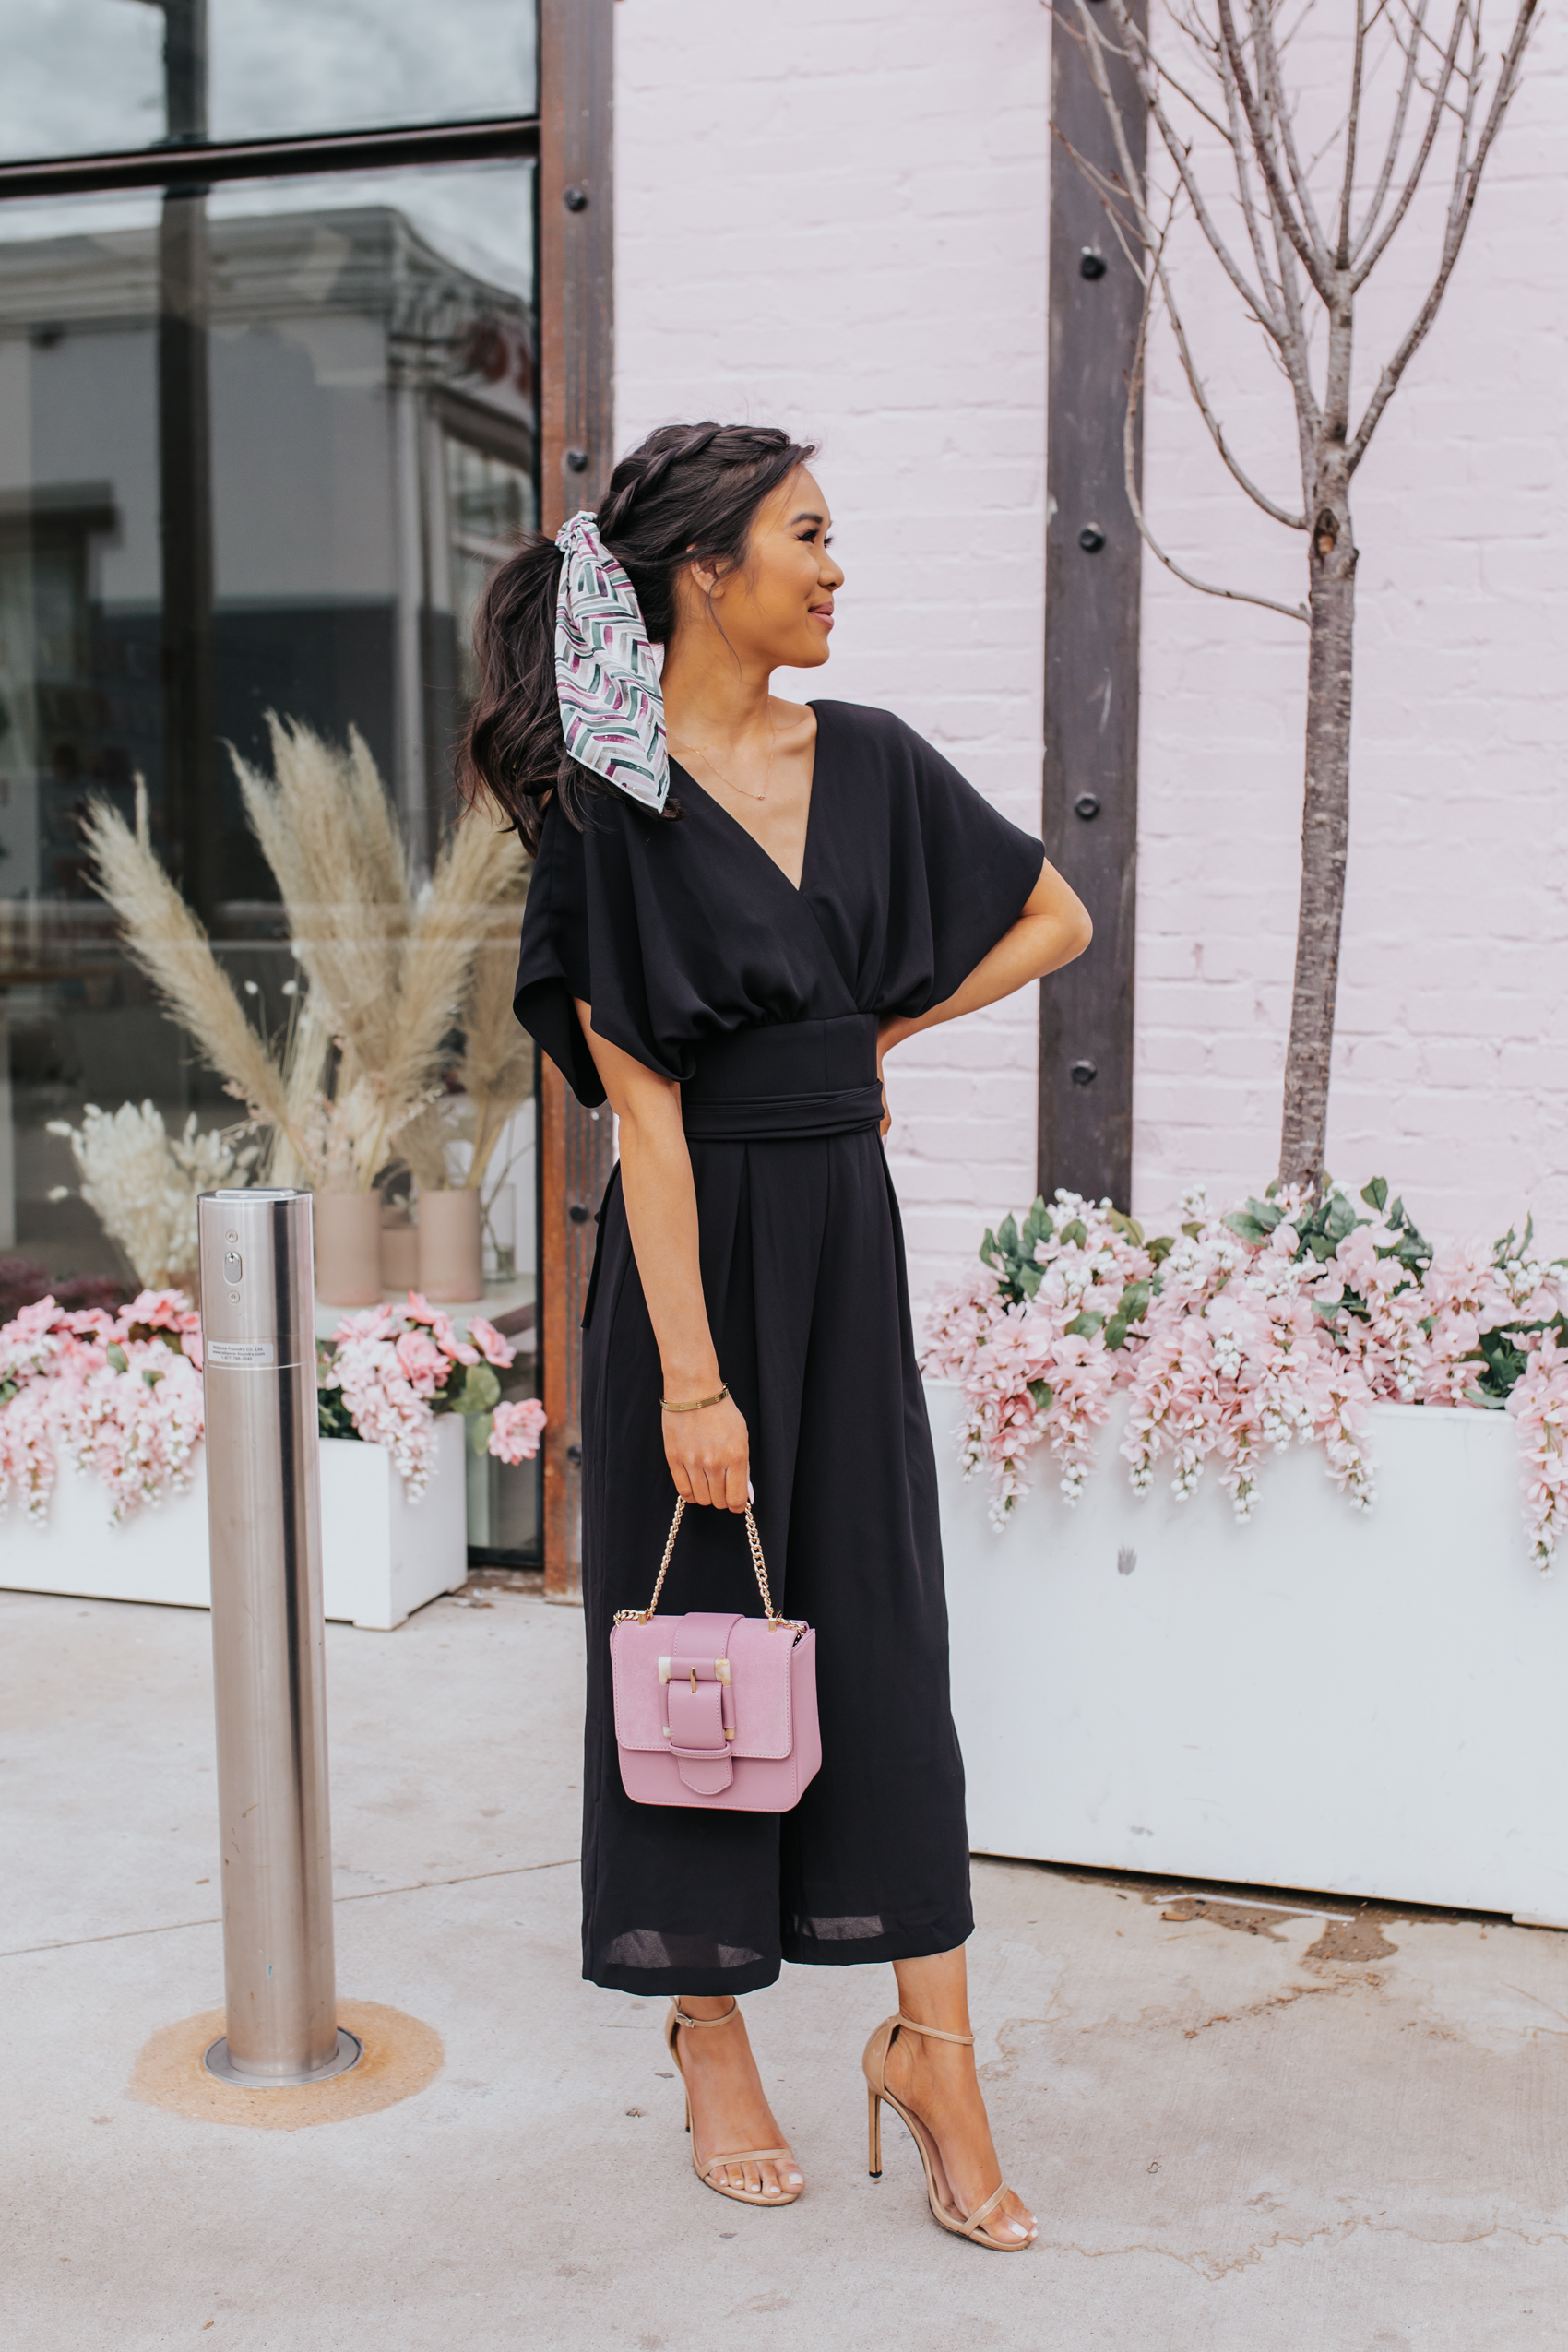 Black wide-leg jumpsuit, chevron hair scarf with a braided hairstyle by Tousled Studio, pink clutch and heeled sandals for spring outfits